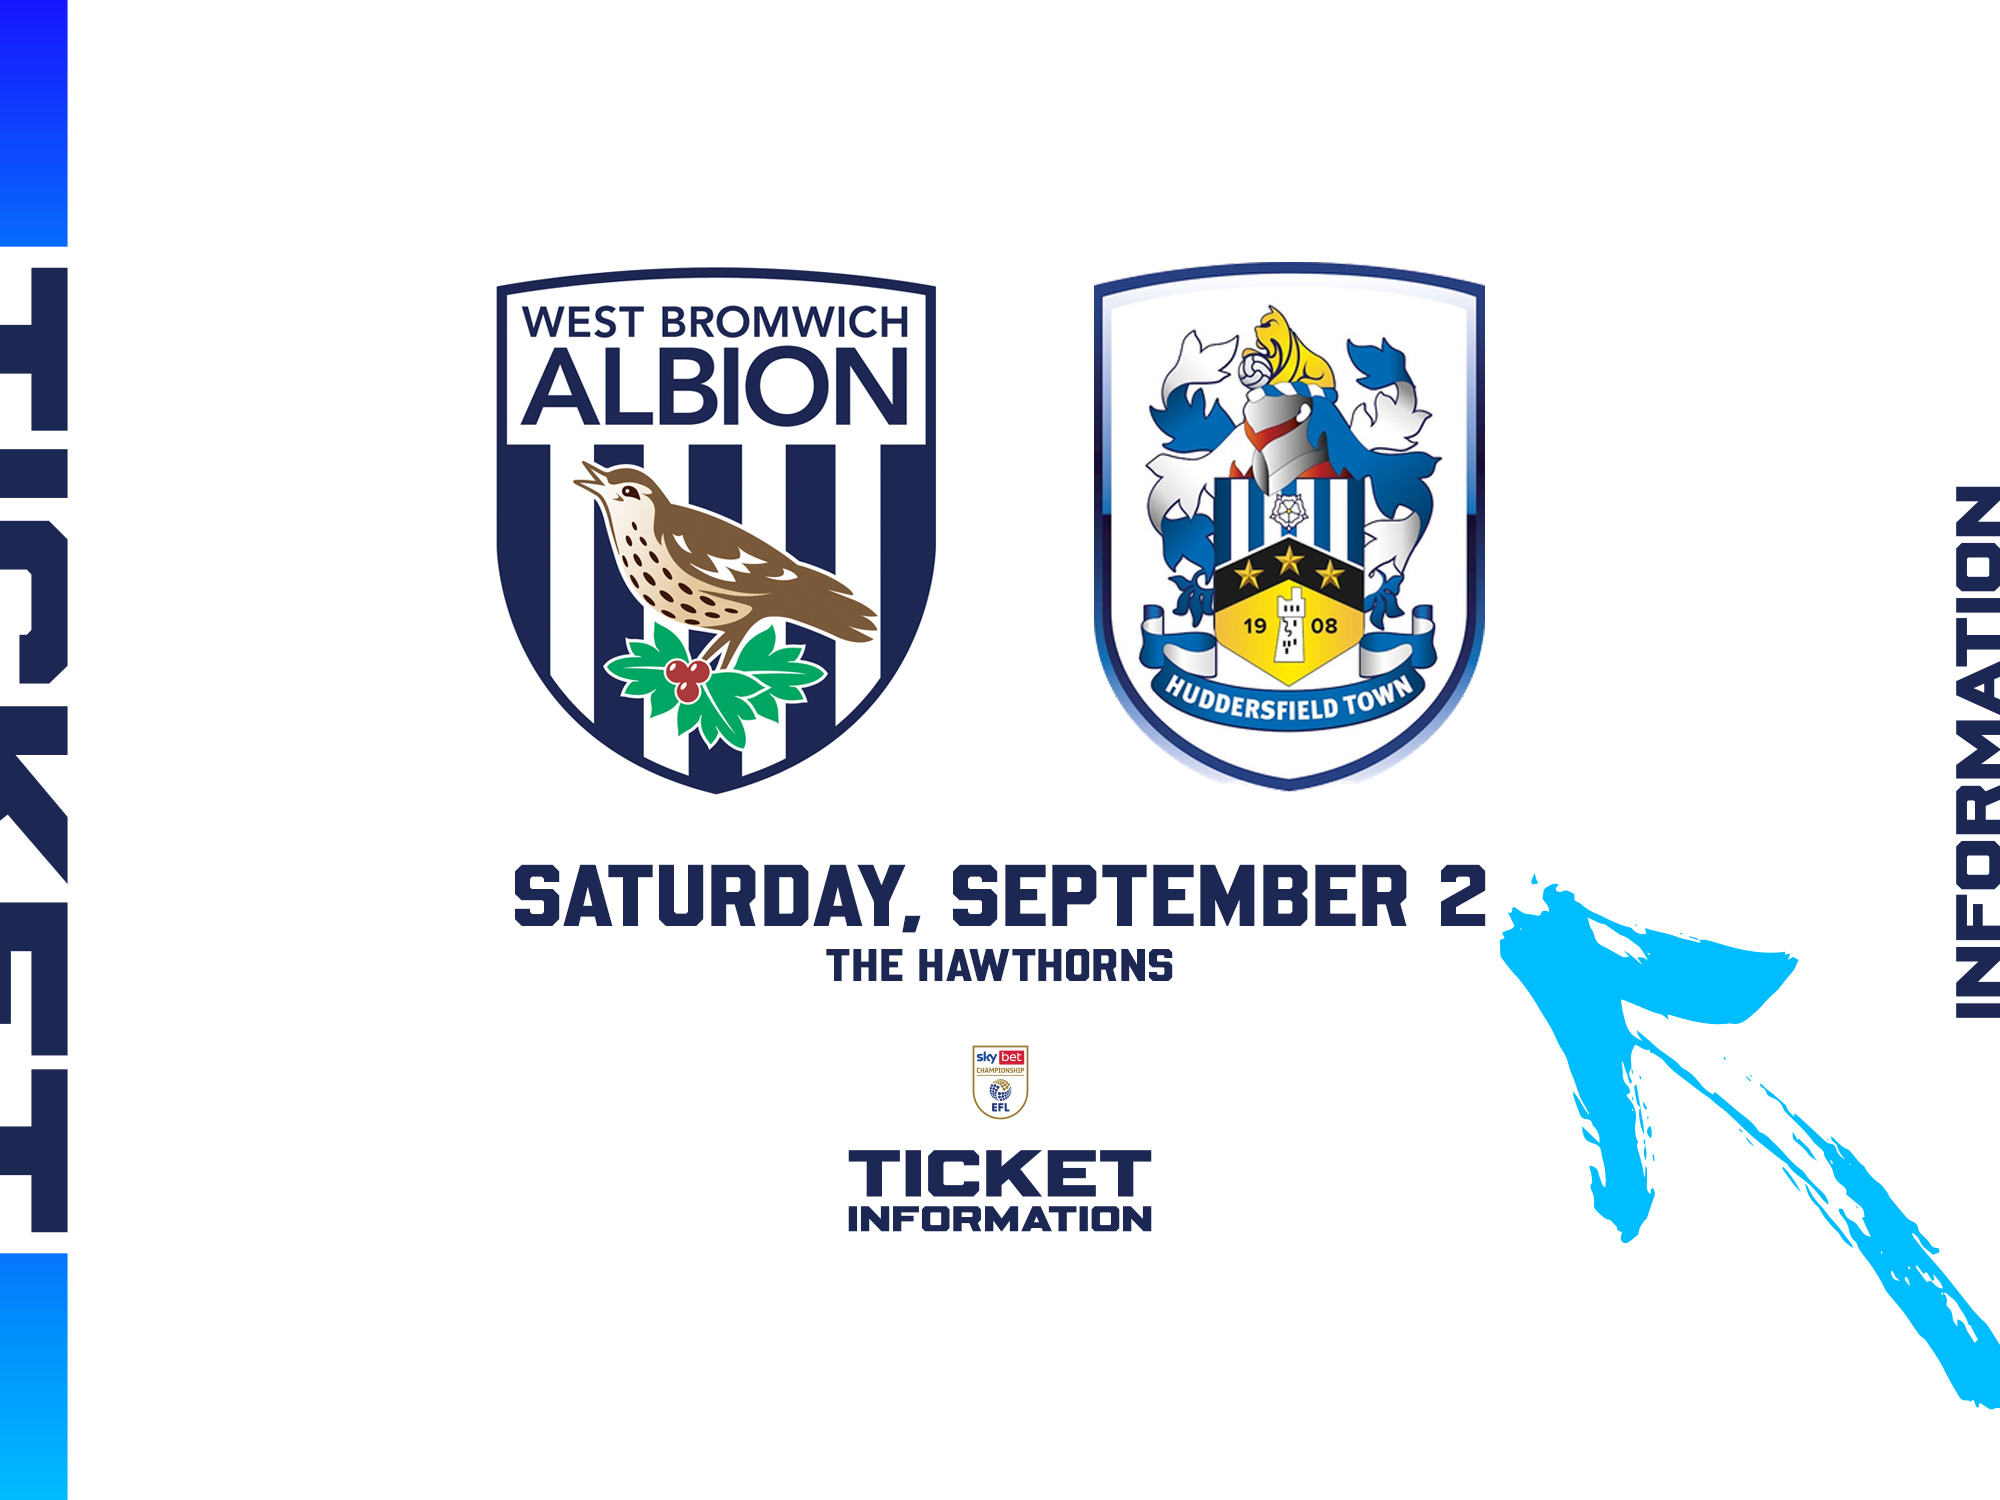 WBA and Huddersfield Town badges in the ticket graphic 